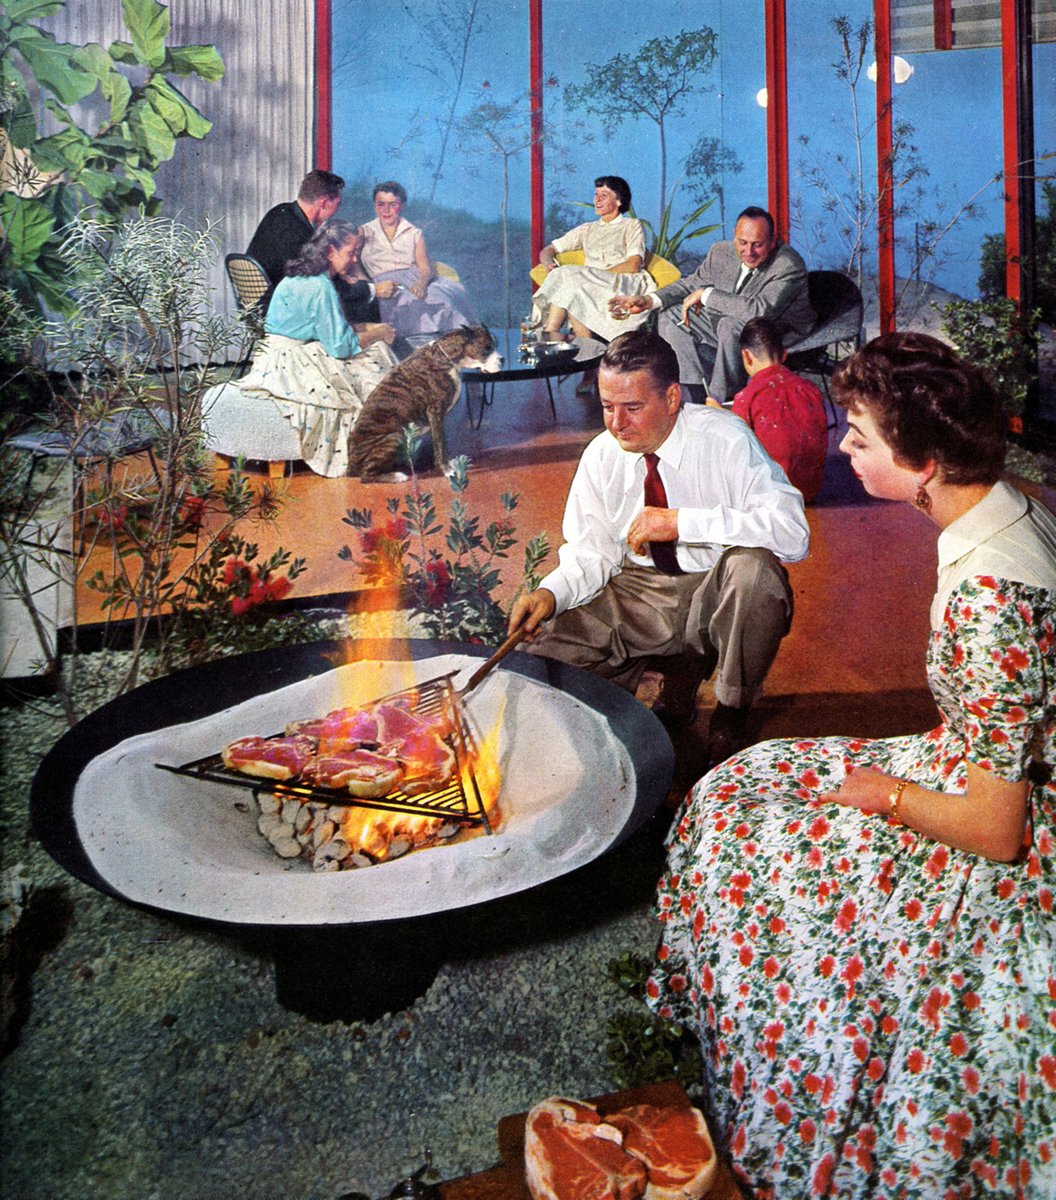 Cookin’ Them Steaks in Style 
​
​#1950sstyle #1950s #50sstyle #50s #party #vintage #1950sfashion #50sfashion #vintagefashion #style #event #nightlife #steak #grill